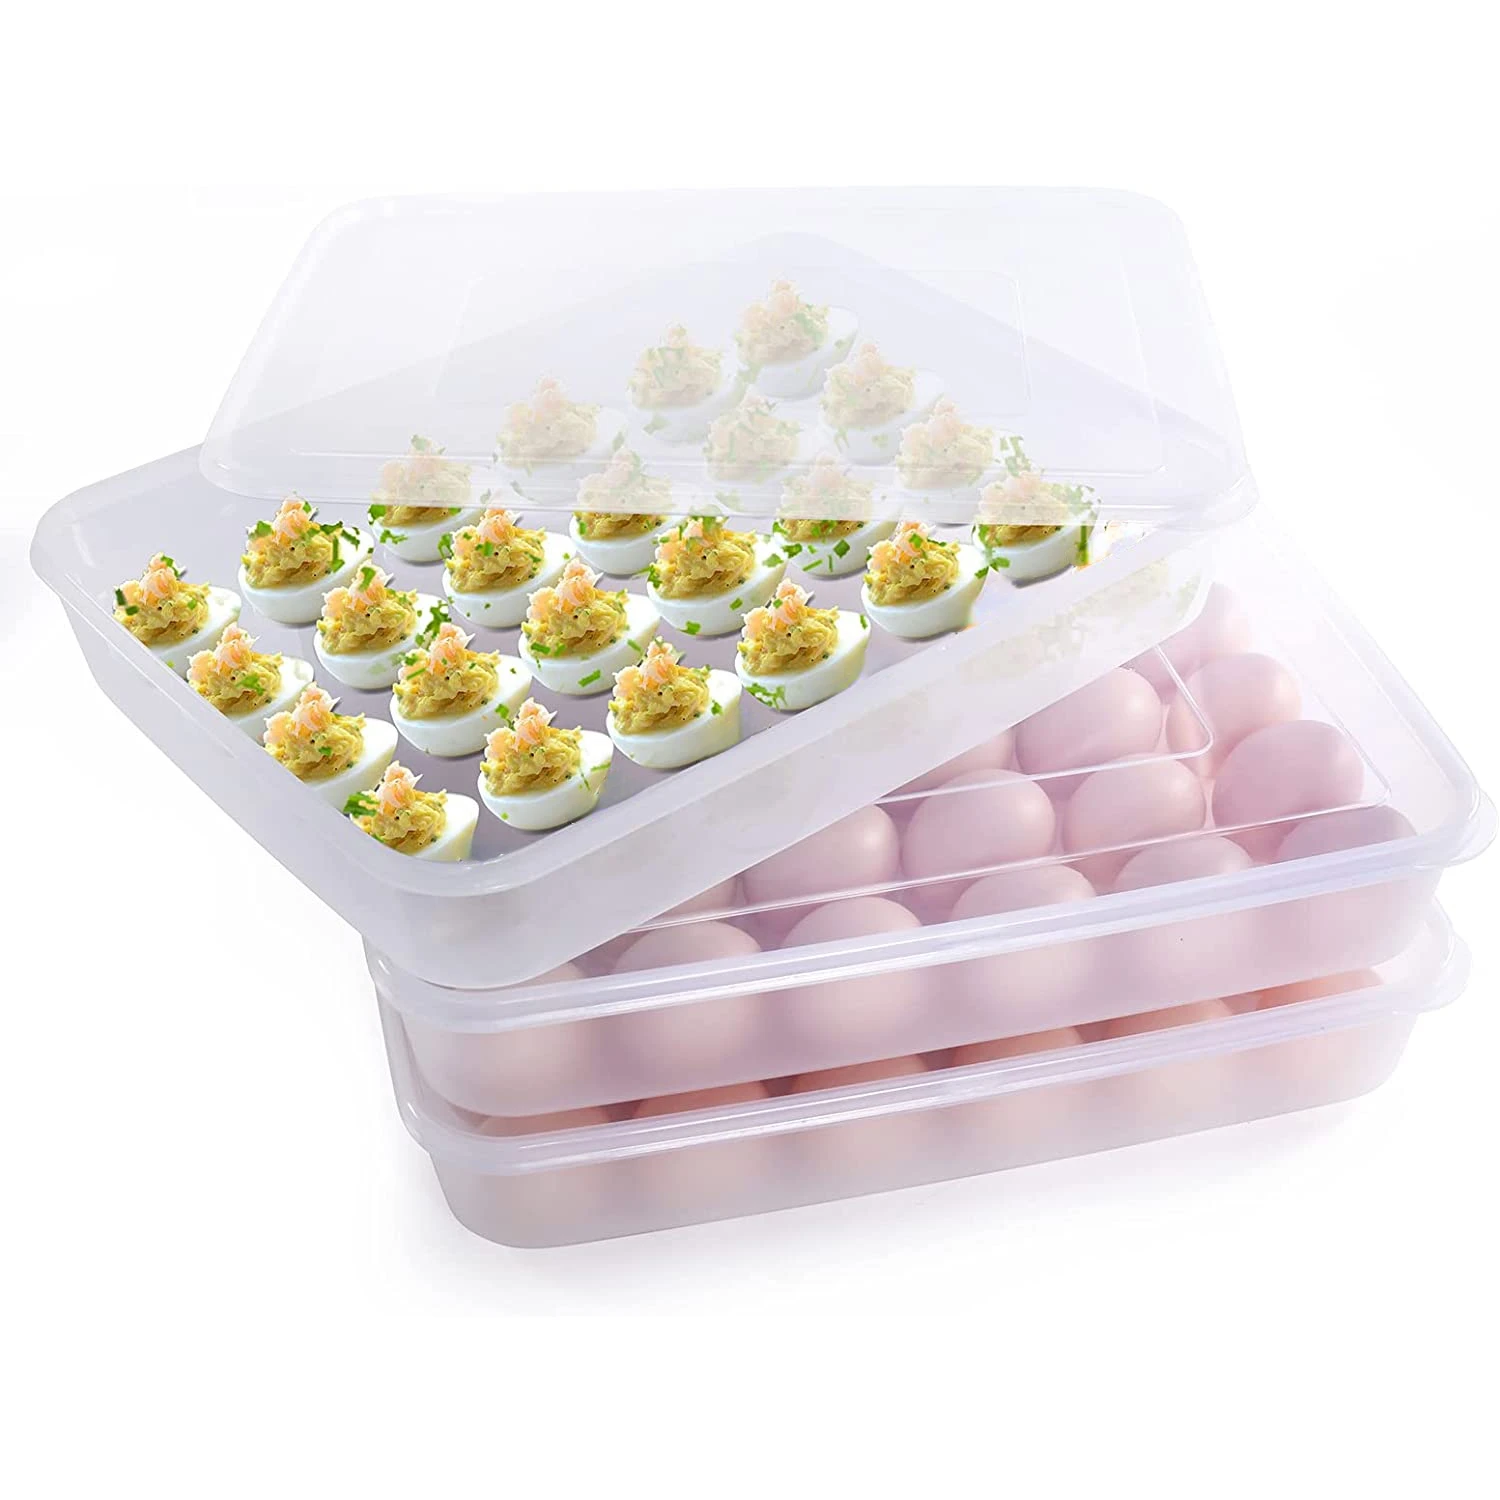 

Deviled Containers Grid Lid Cuisine Plastic Egg Eggs With Eggs Trays Rangement For Refrigerator Holder Box Egg 24 Stackable